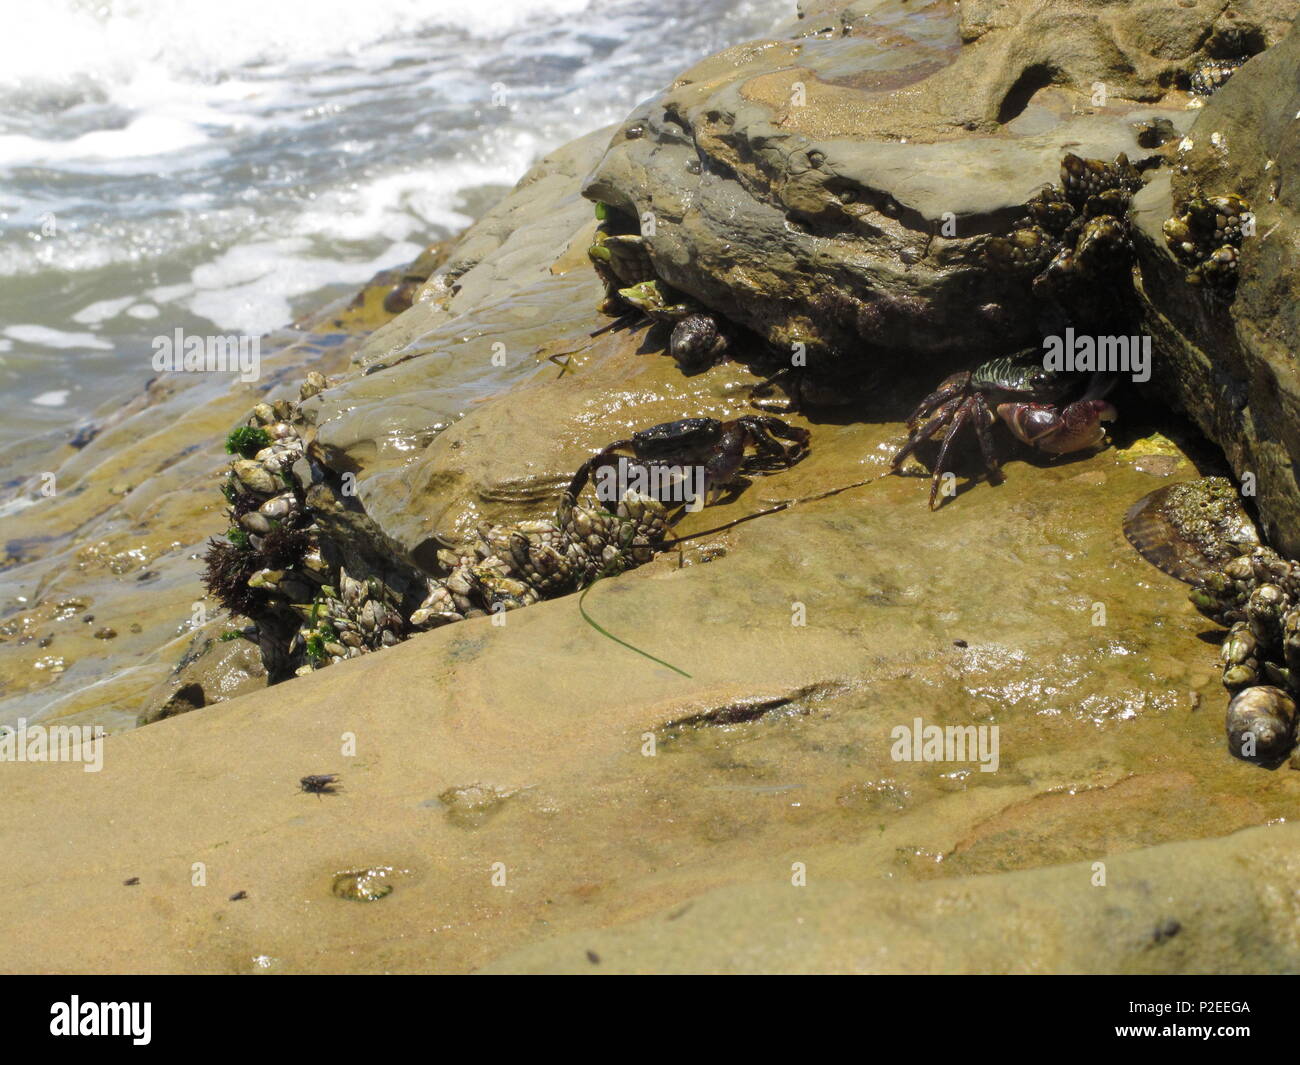 Shore Crabs at the Rocky Tide Pools Areas of Southern California, San Diego Region, Species Name Pachygrapsus crassipes Stock Photo